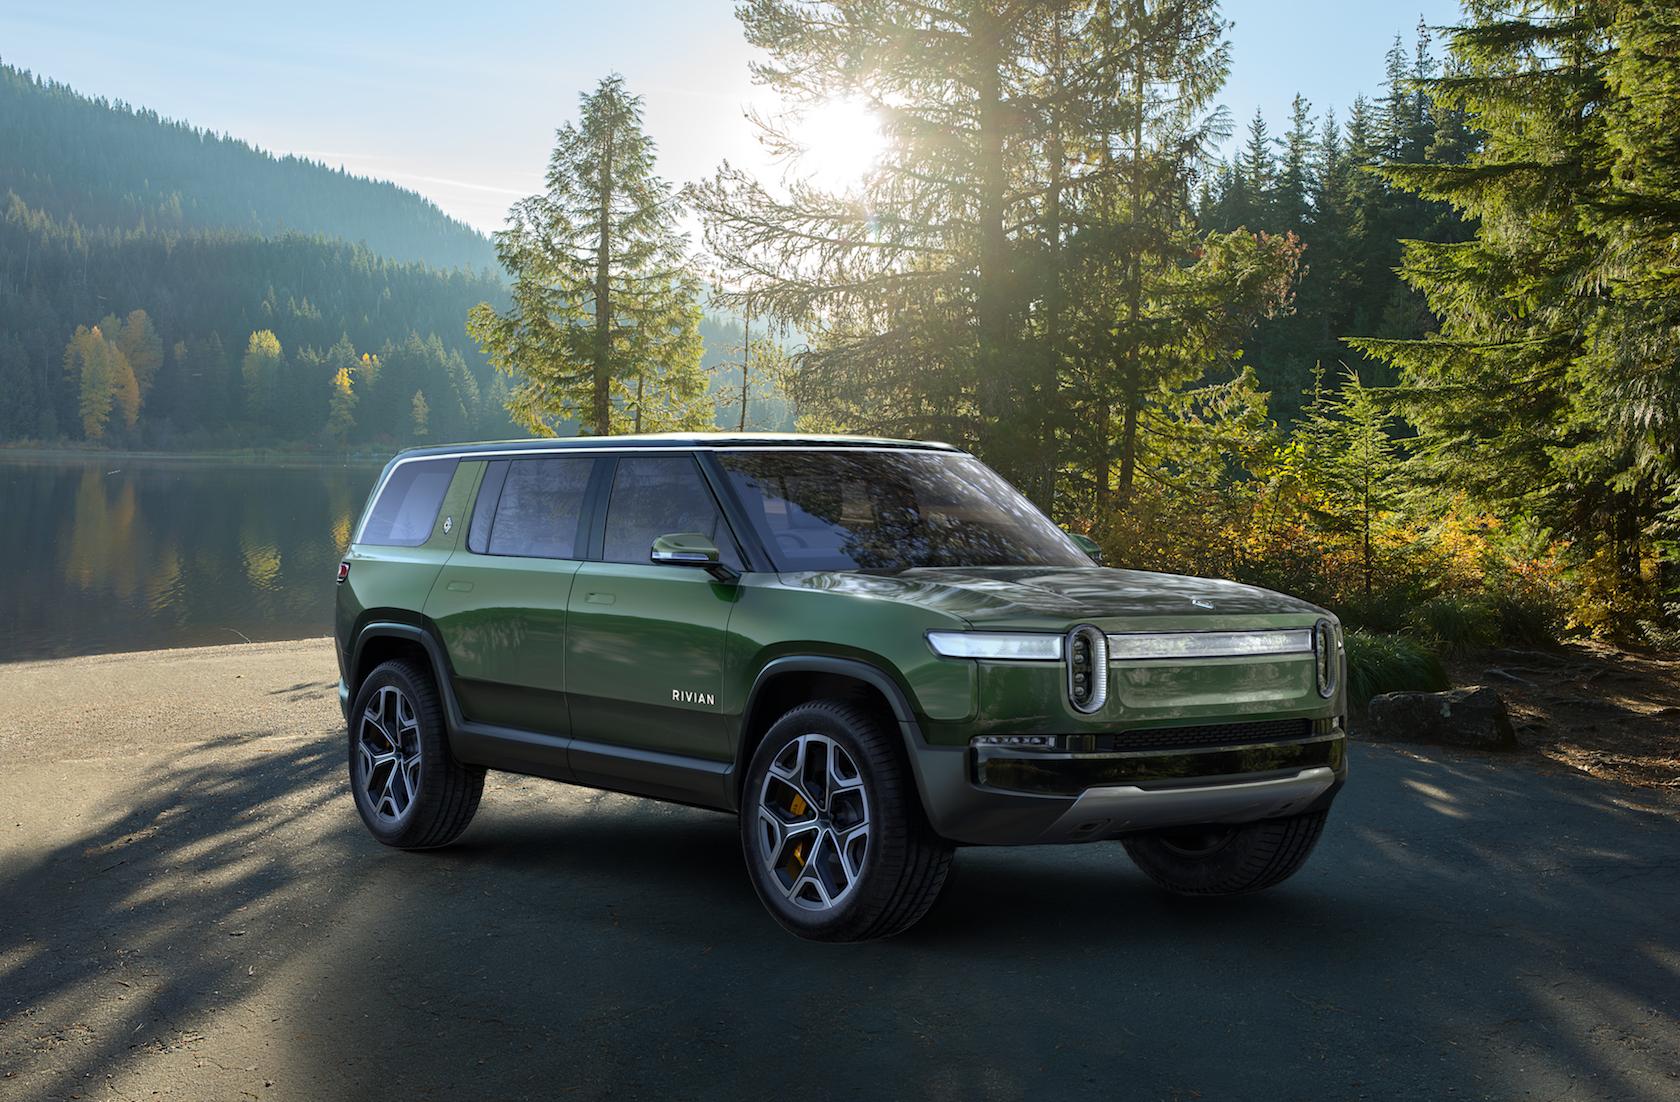 Rivian R1S 7seat electric SUV pairs selfdriving and 410 mile range